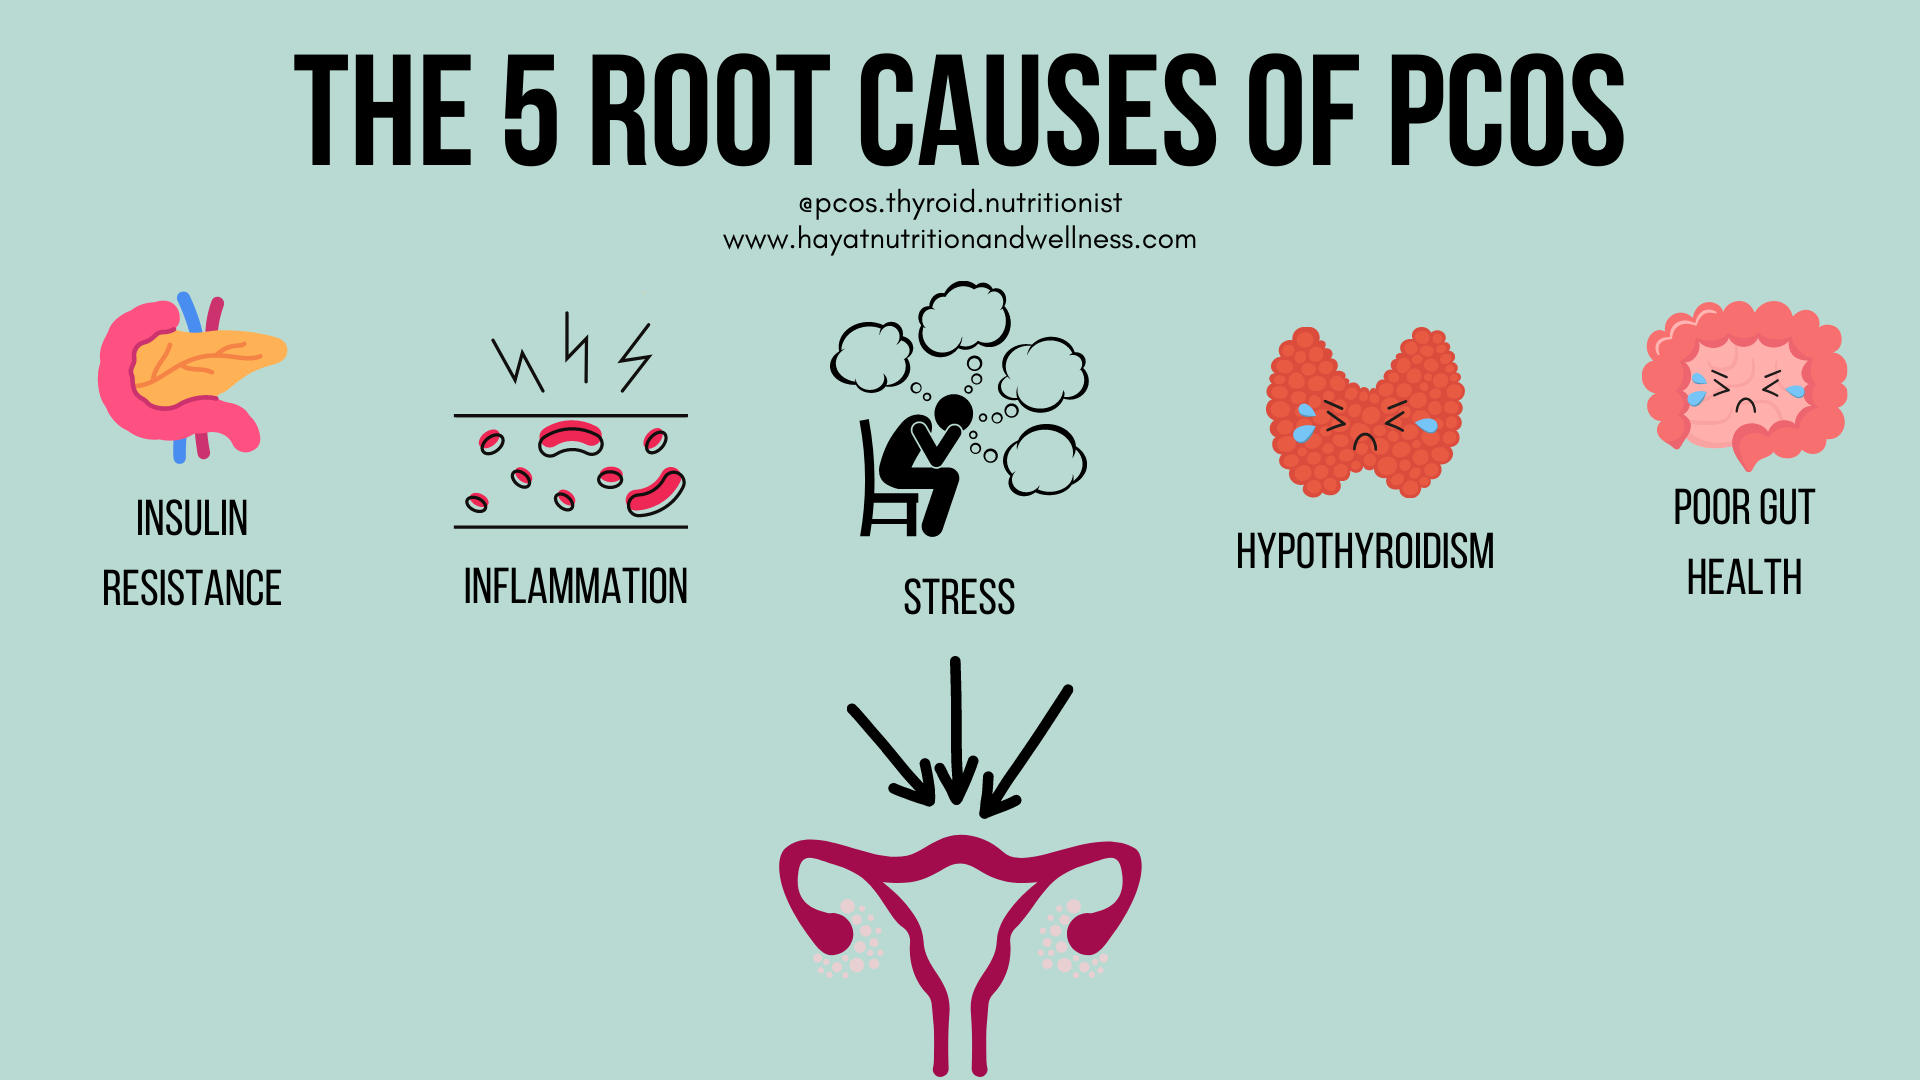 A rectangular block with a title "The 5 Root Causes of PCOS" 

Below the title, there are two blocks of texts, which read "@pcos.thyroid.nutritionist" and "www.hayatnutritionandwellness.com."

Below that are 5 images. Starting from the left, the first image is of a pancreas with the text "insulin resistance" below it.

The next image is a graphic showing the blood stream and 3 lightning drawings above that, to indicate inflammation. The text below this image says "inflammation."

The next image is a graphic of a person sitting in a chair with their hands to their head. 4 thought bubbles surround the person, indicating they are stressed. Below this image is the word "Stress."

The next image is a graphic of the thyroid gland with a sad face. The text below this image reads "hypothyroidism."

The last image all the way on the right is a graphic of the digestive system with a sad face. The text below this reads "poor gut health."

Below this row of images are 3 arrows pointing below.

Underneath the arrows is a graphic of the female anatomy, showing the ovaries.